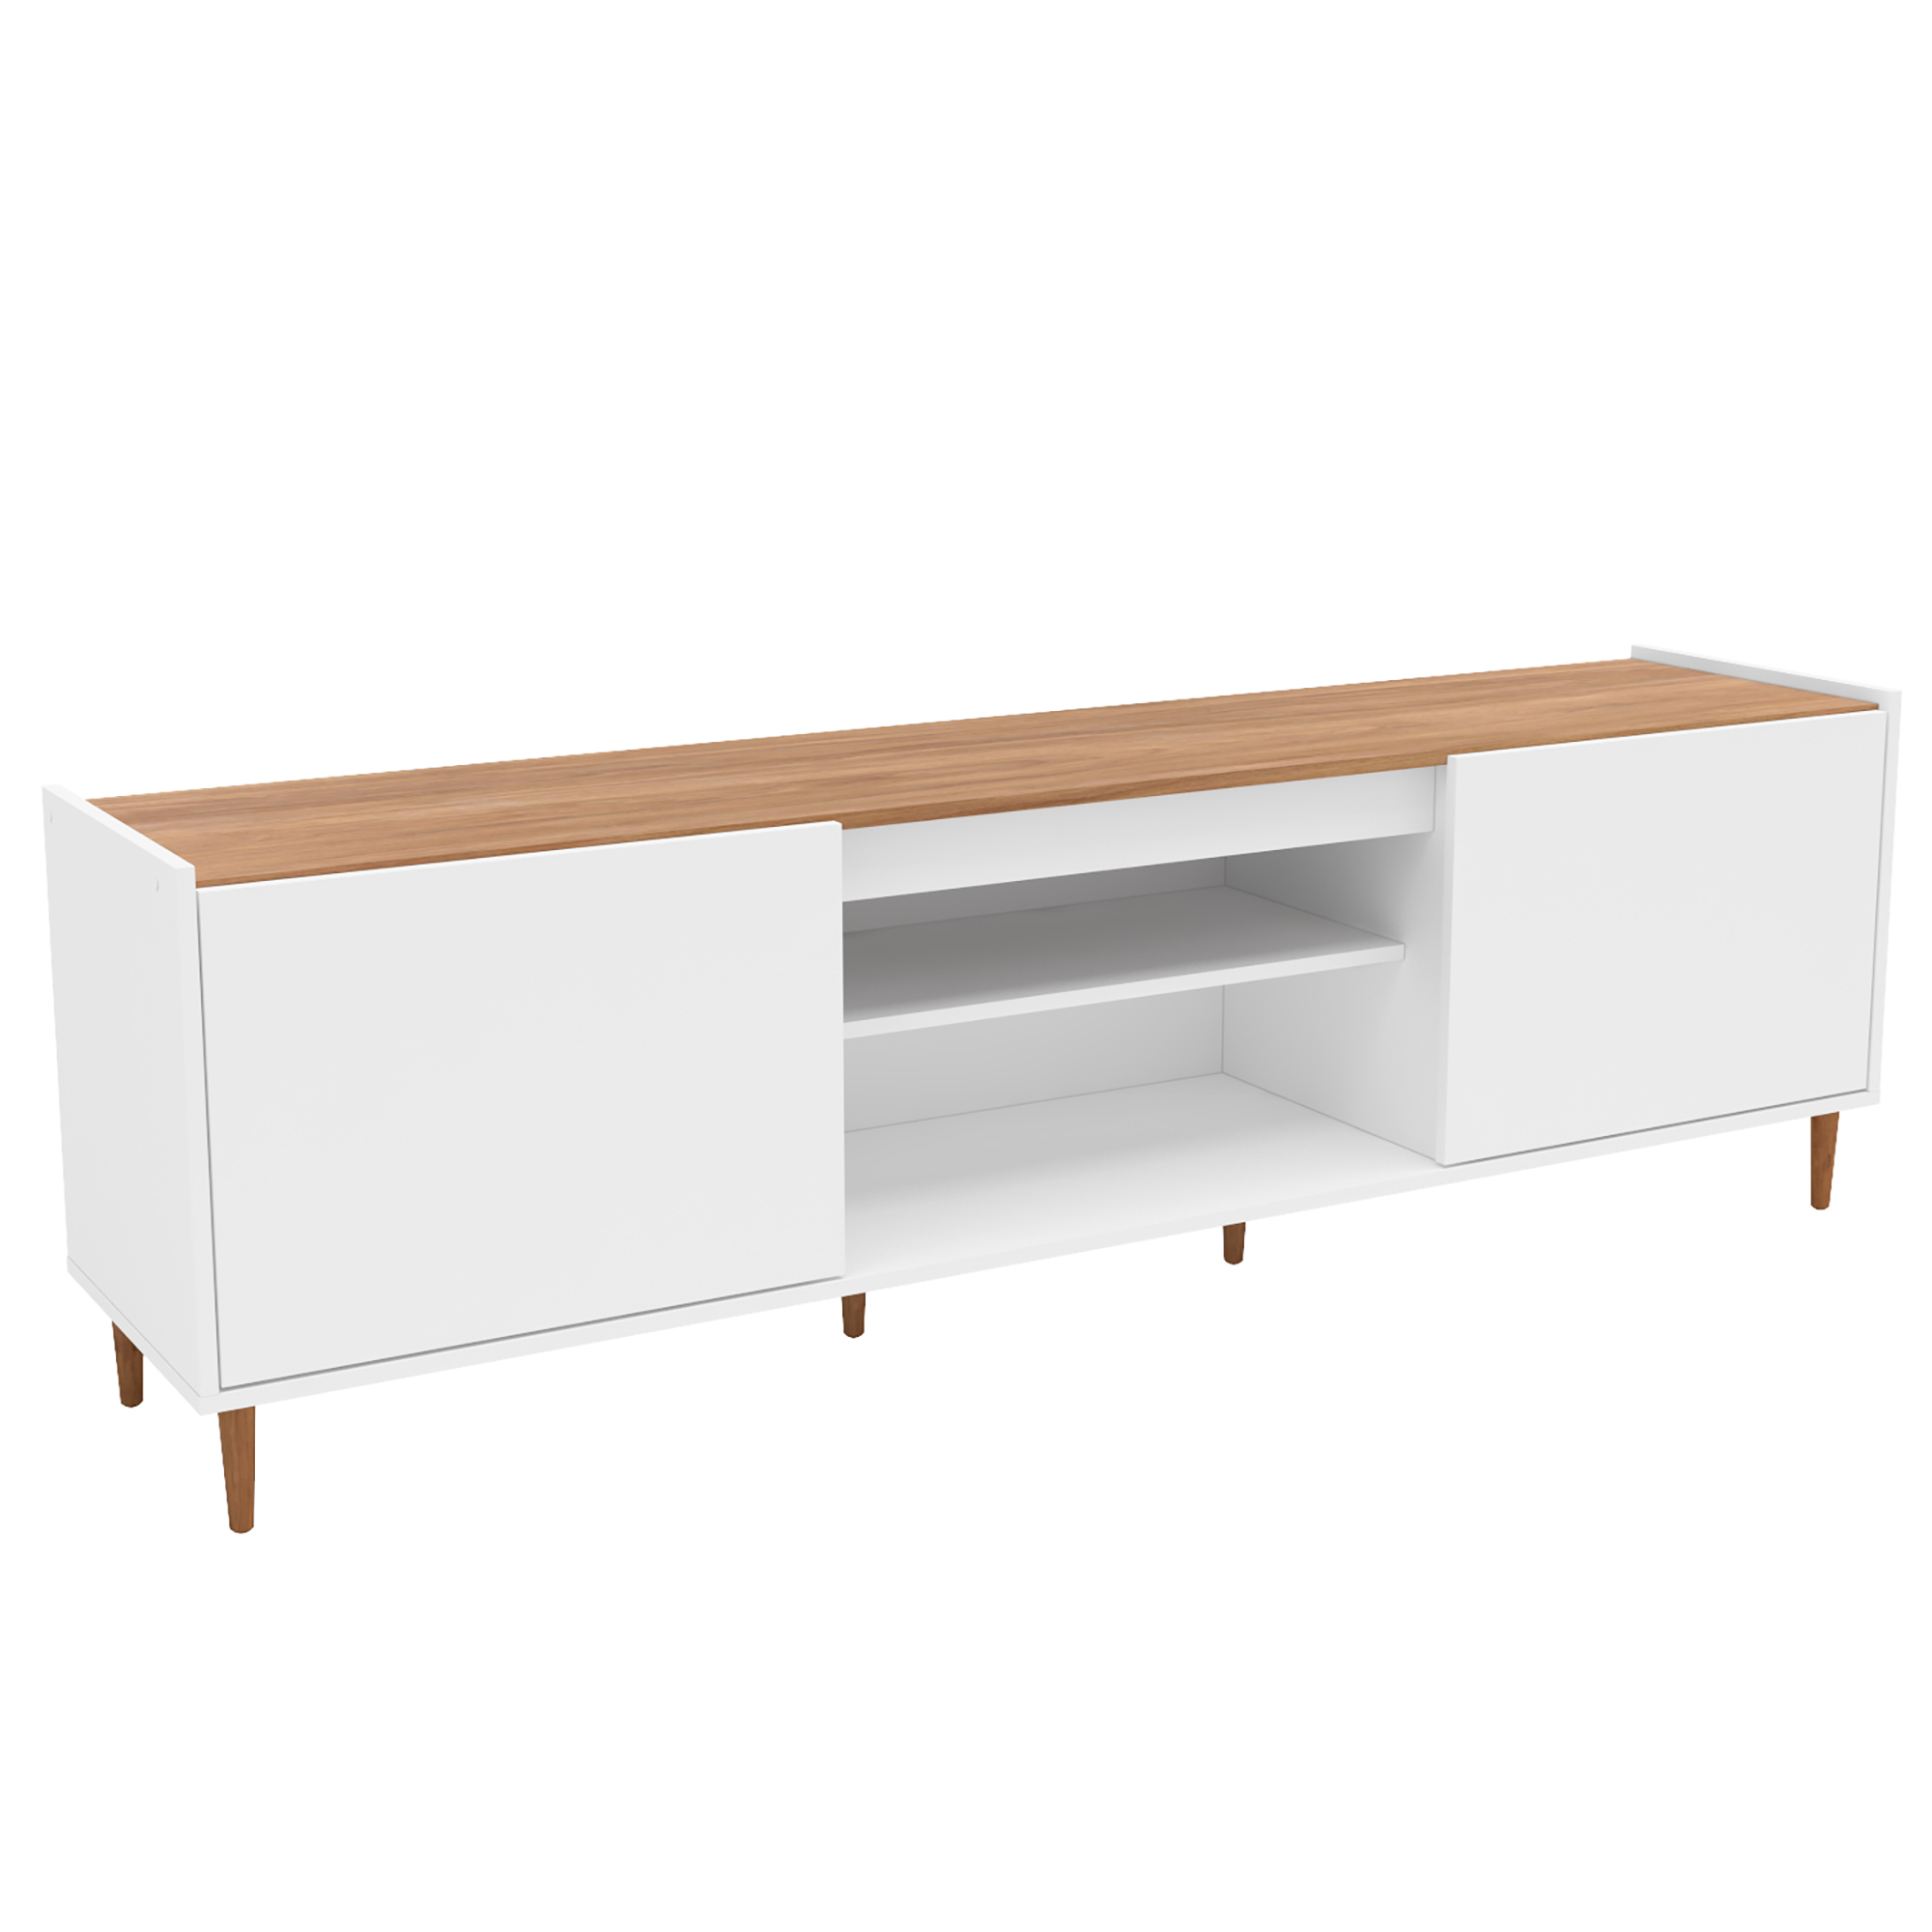 Buffalo 70.8 in. White Wood TV Stand with Two storages Fits TV's up to 65 in.